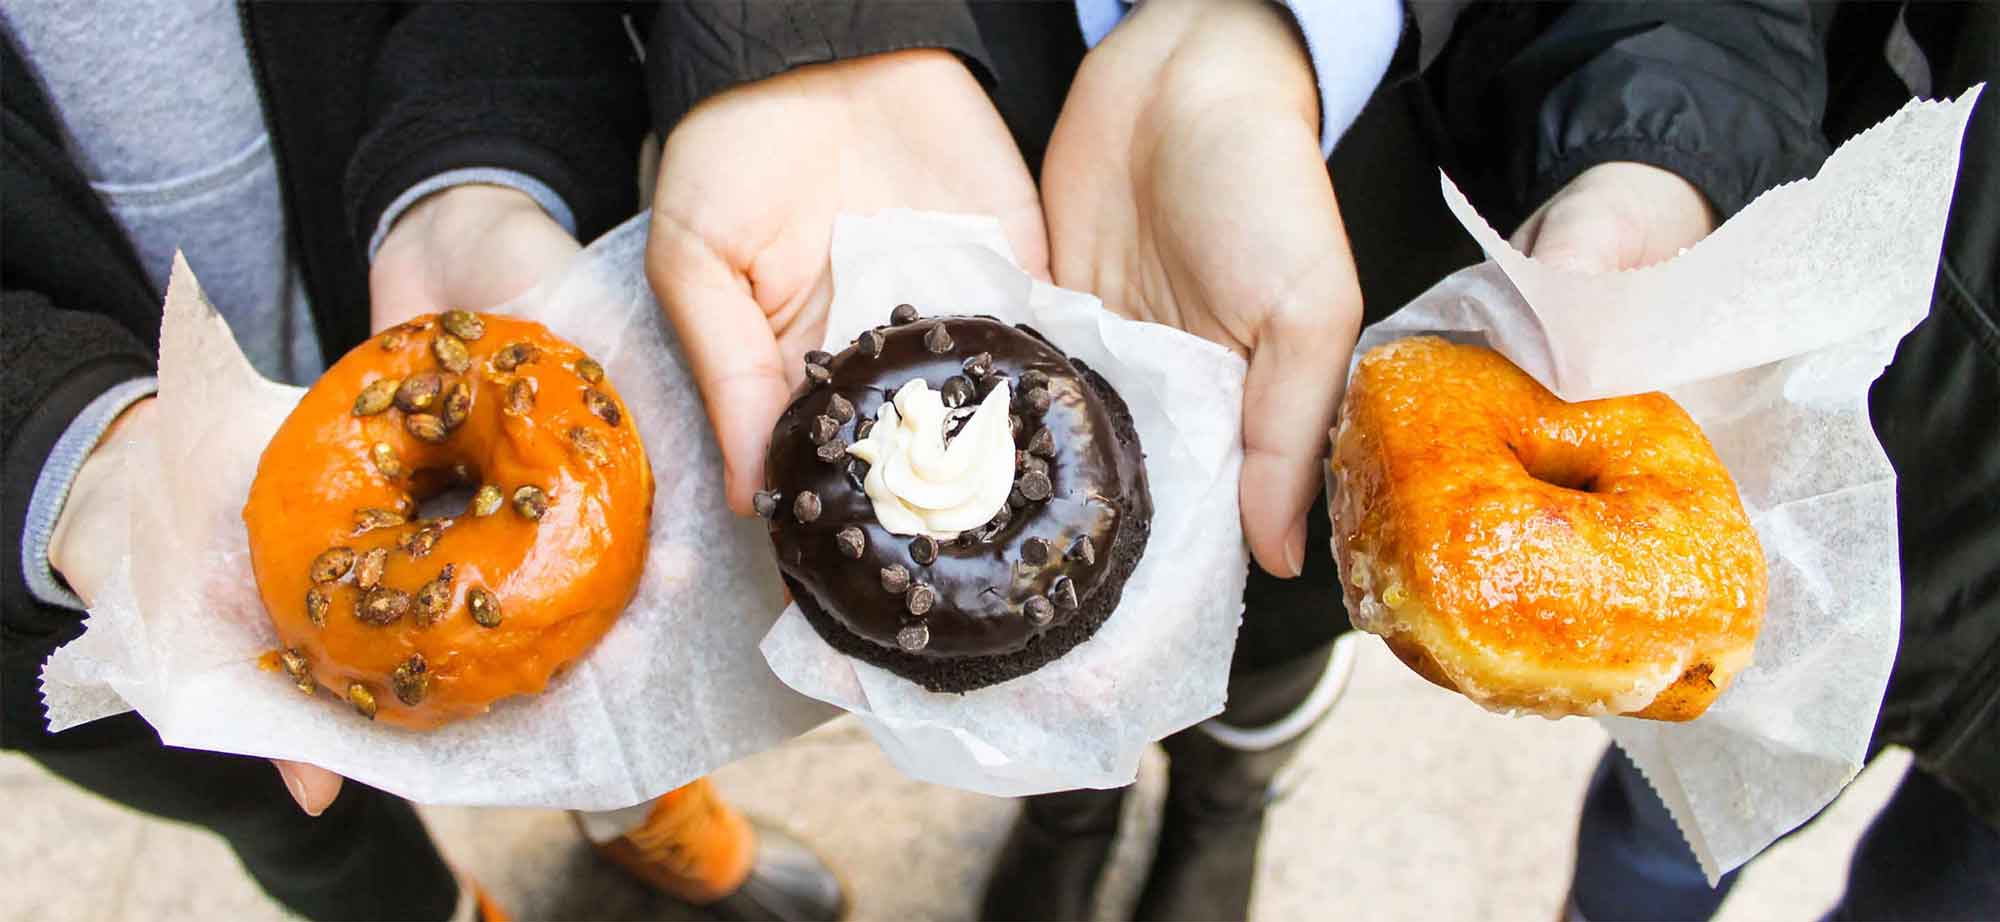 Hands outstretched offering three types of doughnuts, including a seasonal one to the left, a chocolate one in the middle and their creme brulee offering on the right.